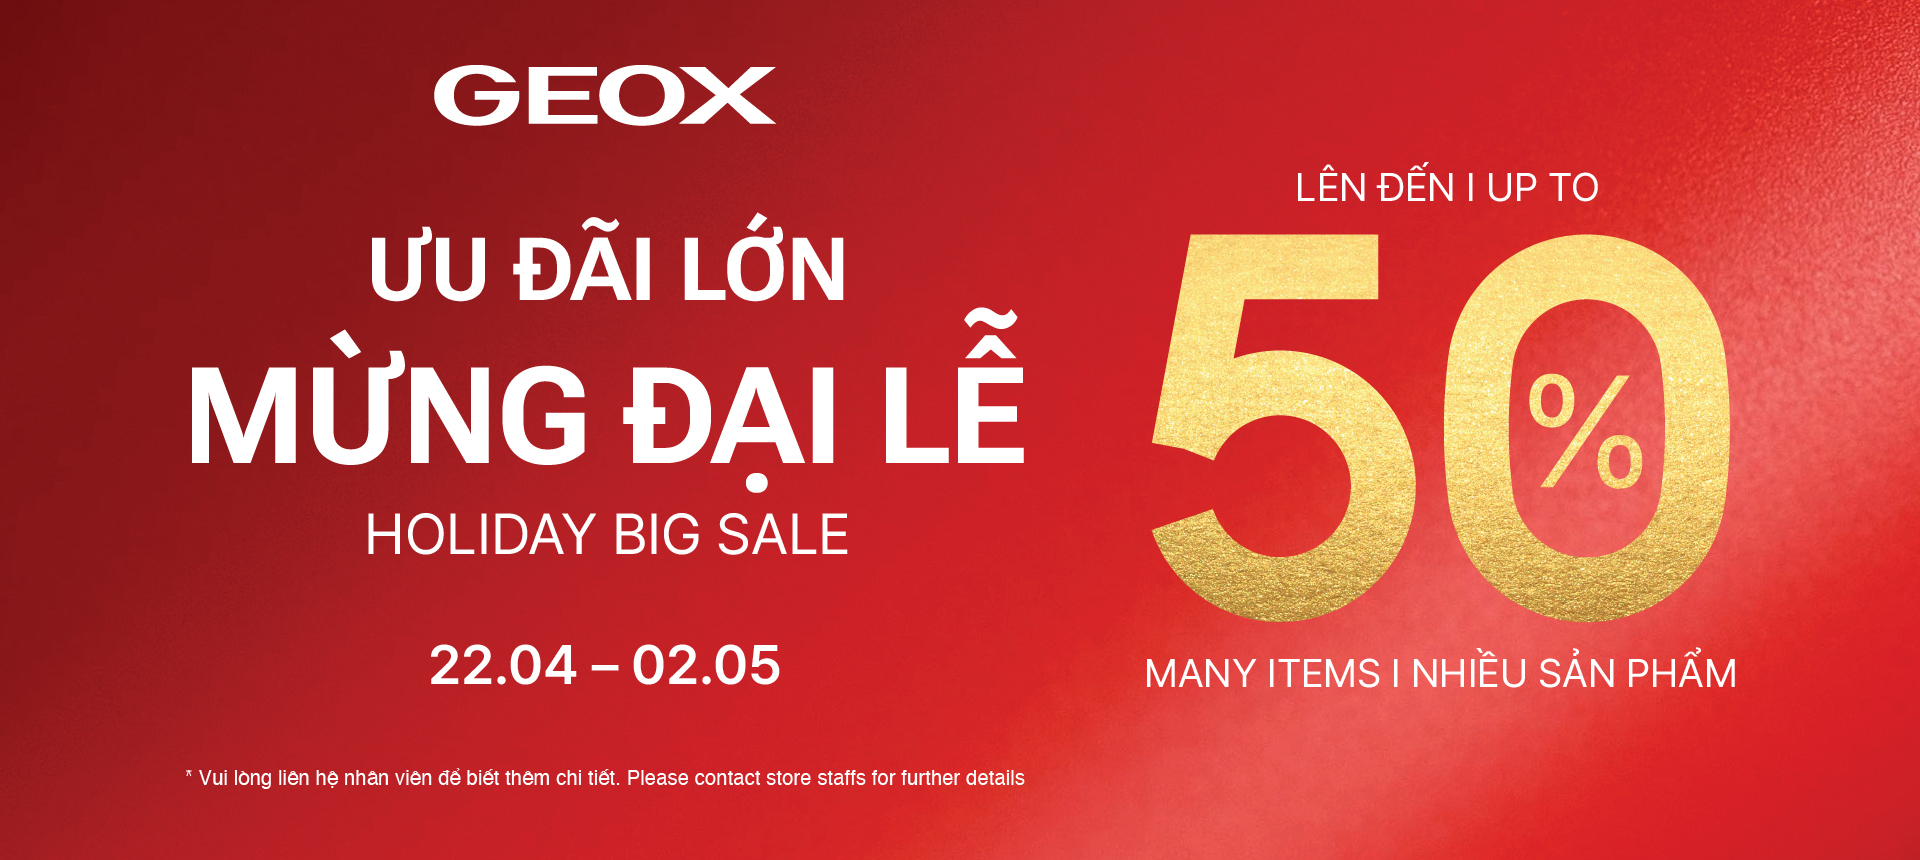 GEOX - HOLIDAY BIG SALE - UP TO 50% OFF